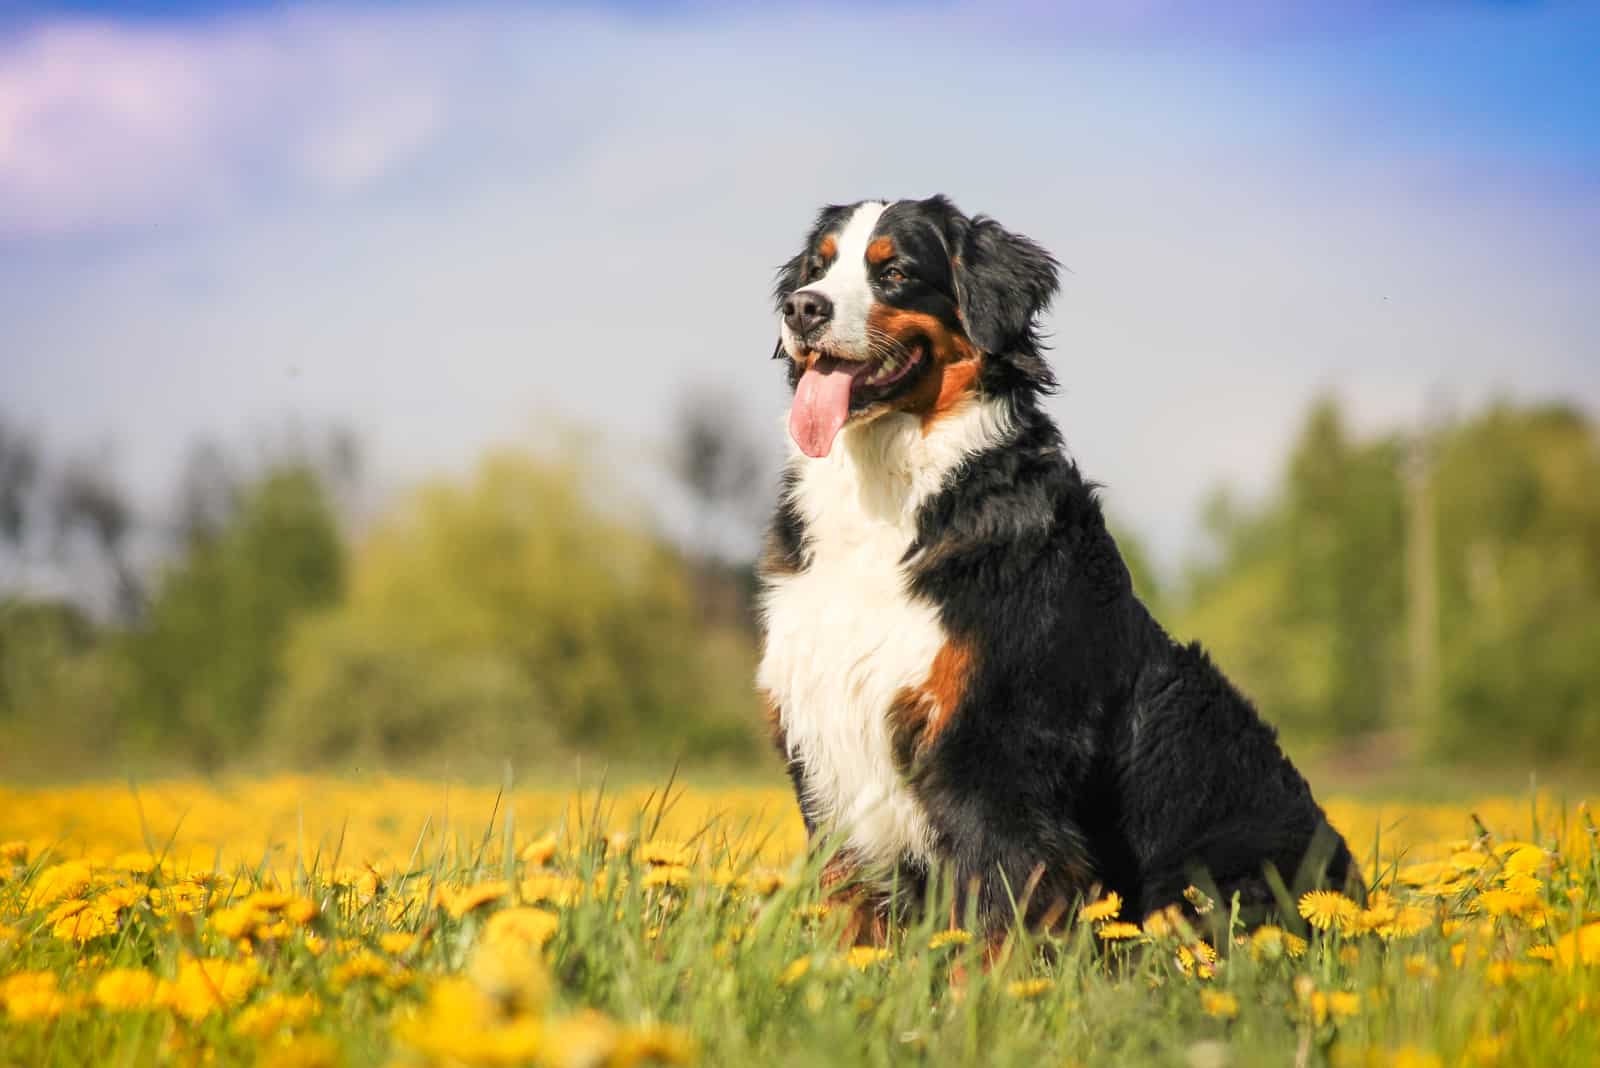 bernese mountain dog in nature